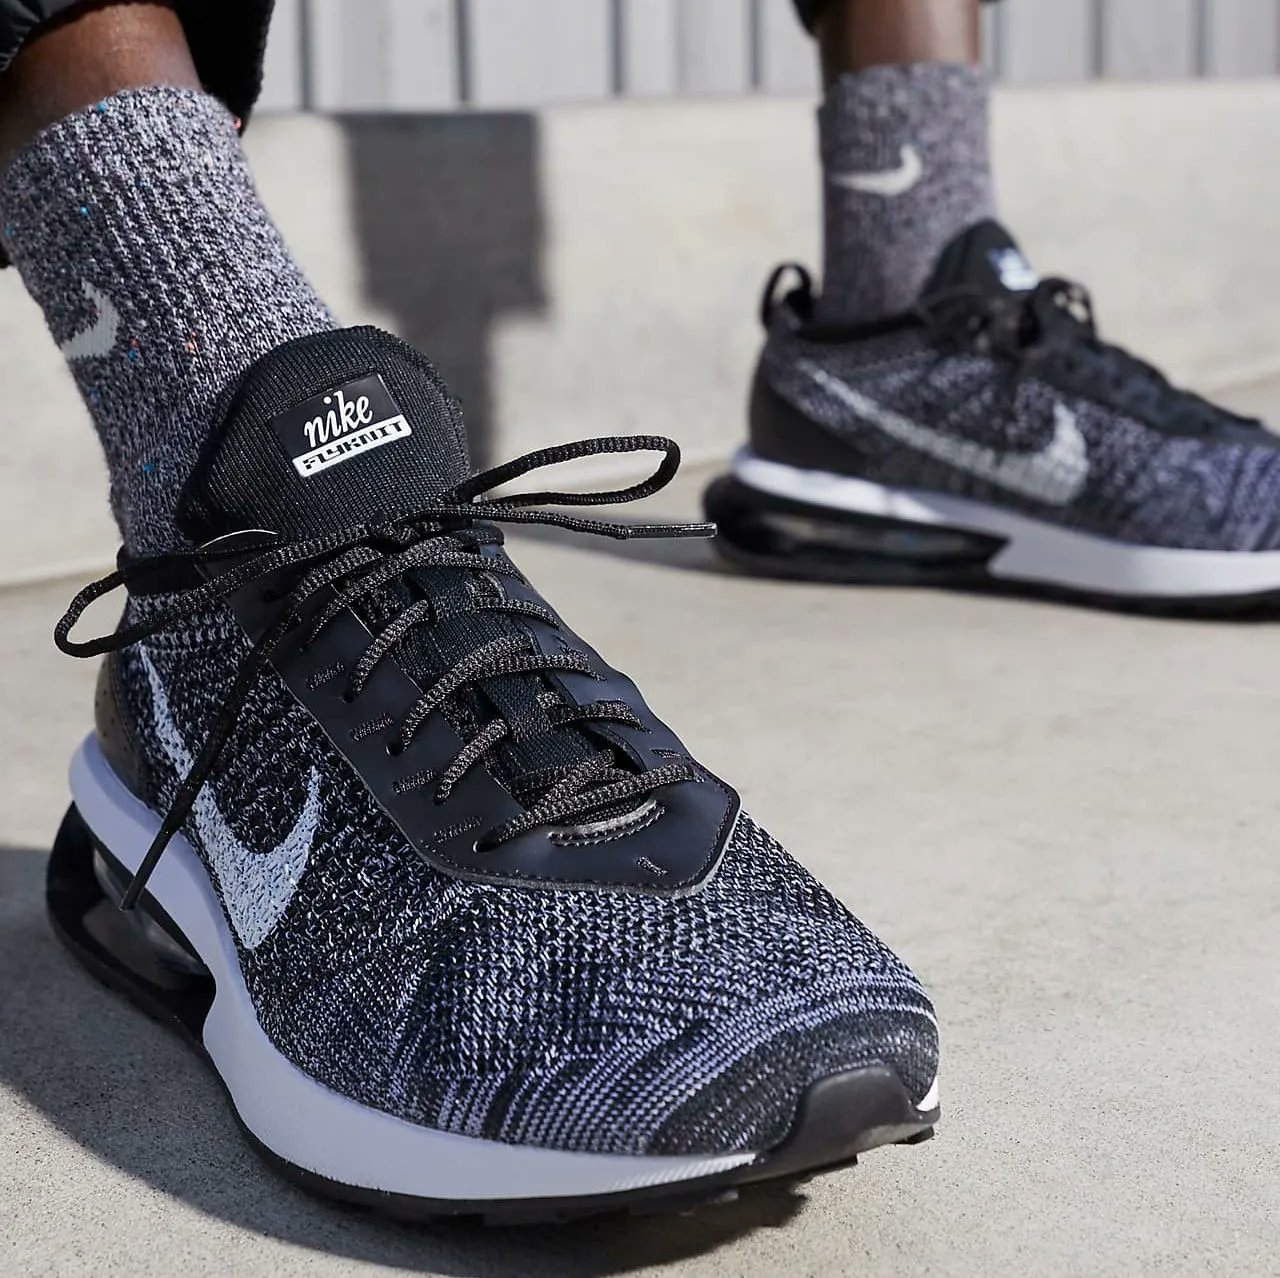 KicksFinder on Twitter: "Ad: STEAL FNL/JD Air Max Flyknit "Oreo" $65 + Free shipping and returns FNL &gt;&gt; JD https://t.co/KyrtcGzDar https://t.co/52BW3EO9uc" / Twitter